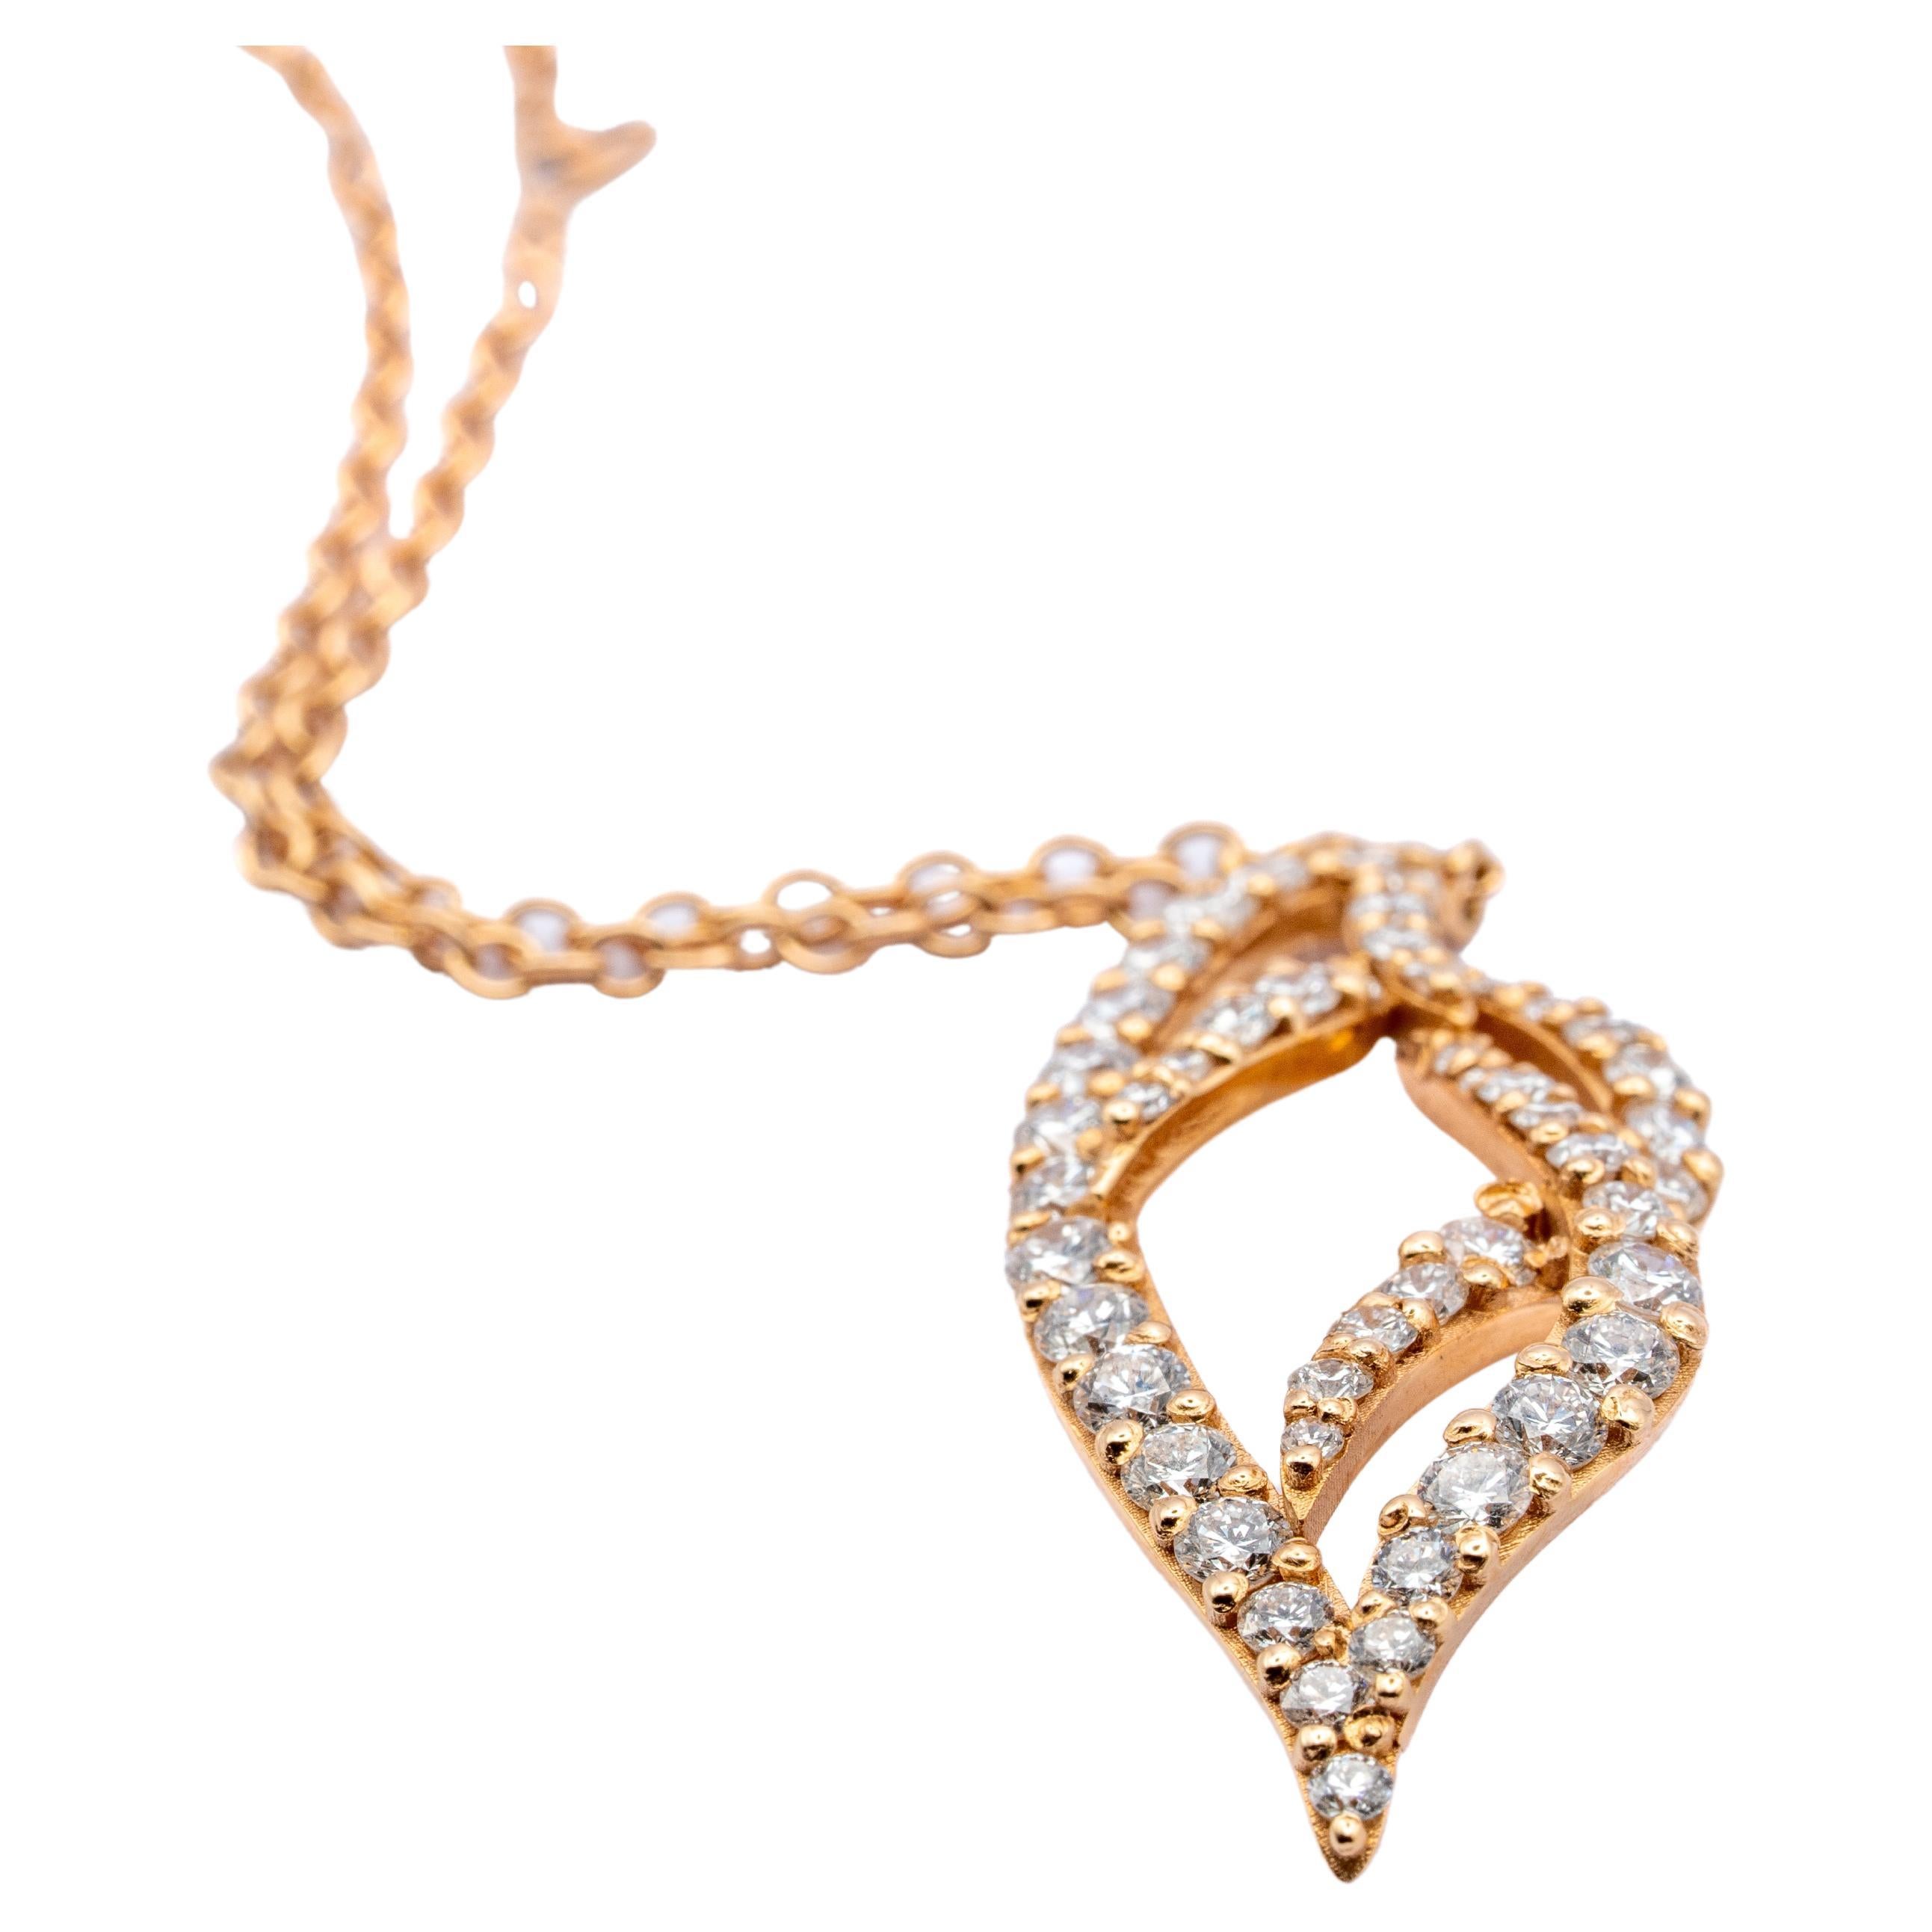 This wonderful Leo Milano pendant from our Solari collection shows in every detail a very complicate yet perfectly done workmanship. The pendant and the chain are in 18 carat rose gold .The object weights 7.89 grams diamonds VS G clour for 1.45